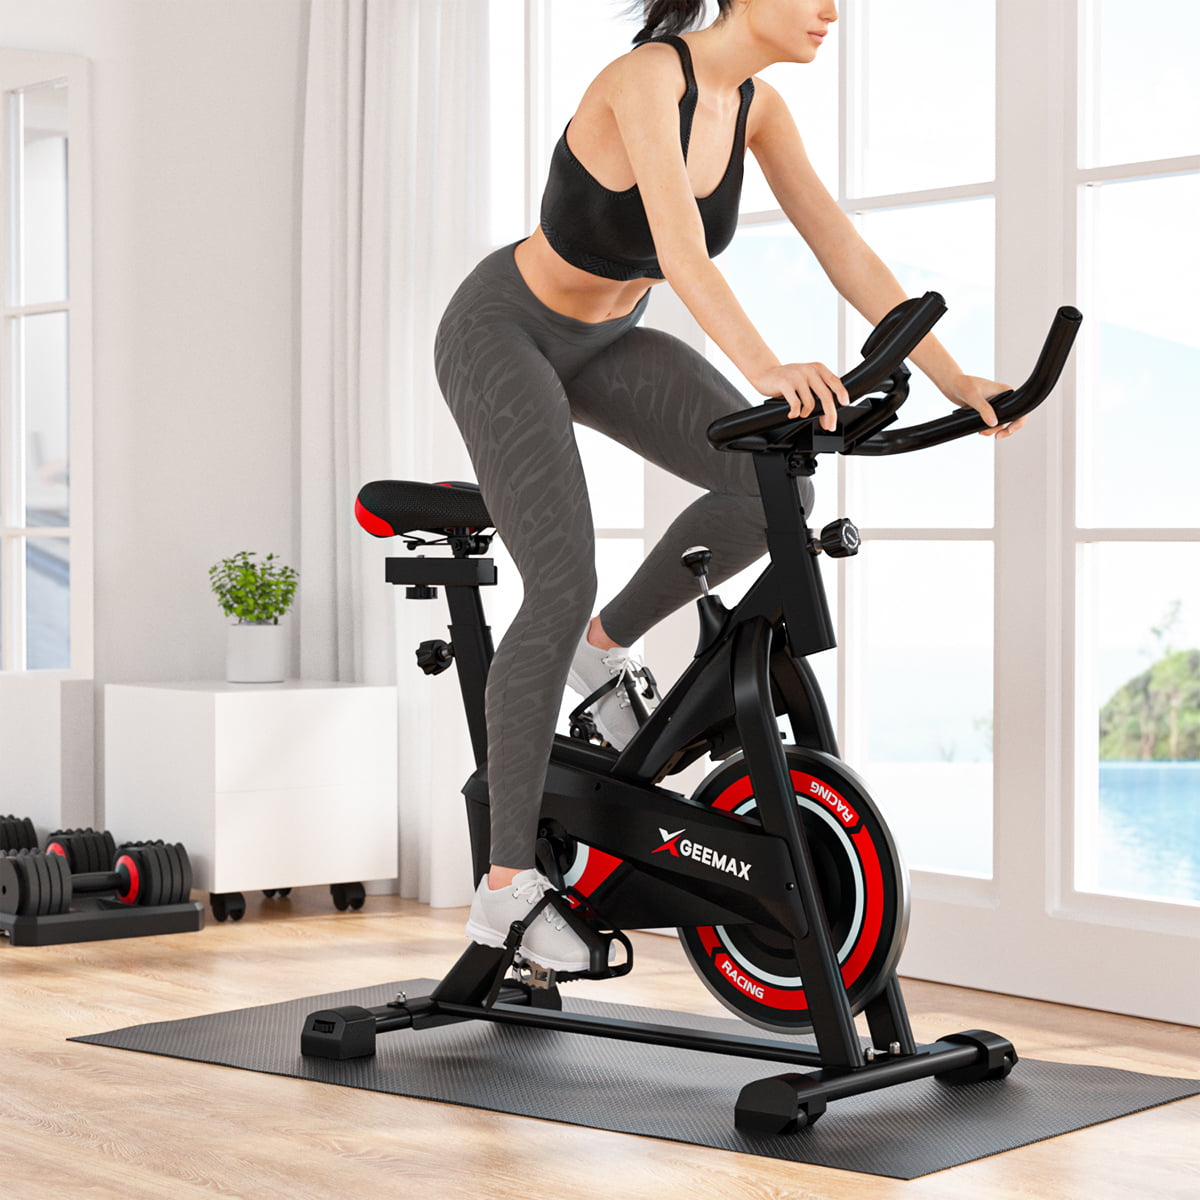 NEW Exercise Upright Bike Stationary Bicycle Cardio Workout Trainer Cycle Gym 